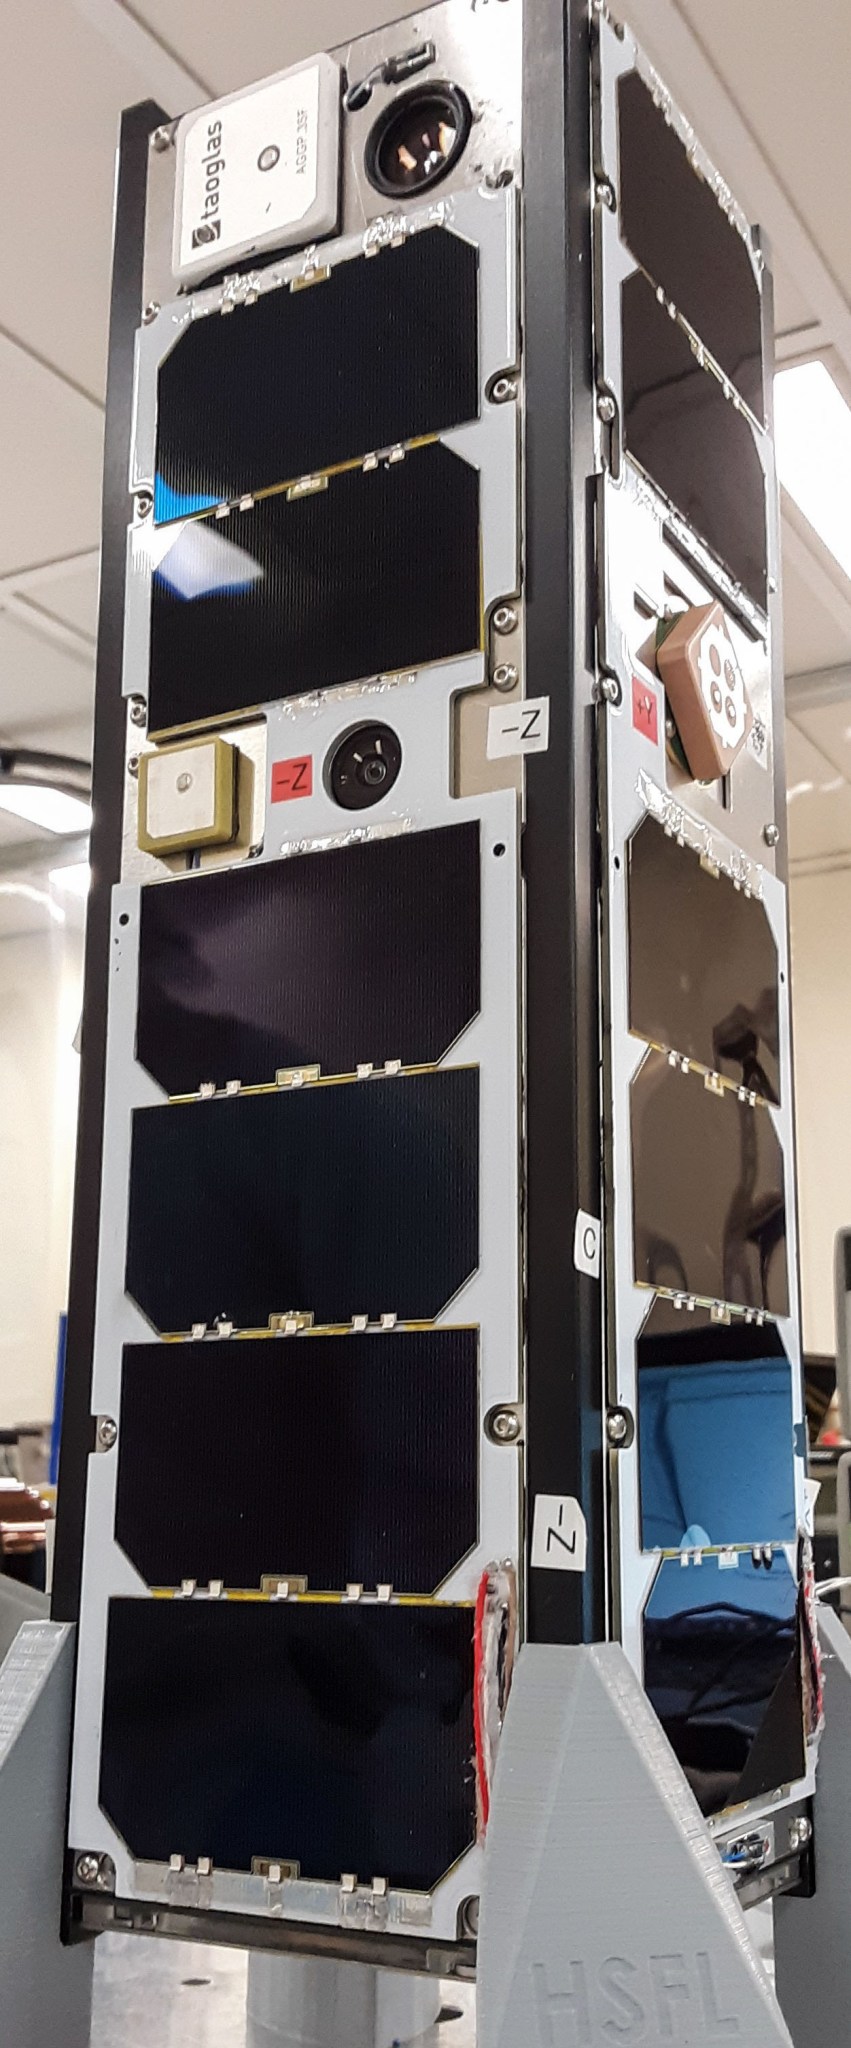 A preflight view of Neutron-1 3U CubeSat fully assembled prior to vibration testing.